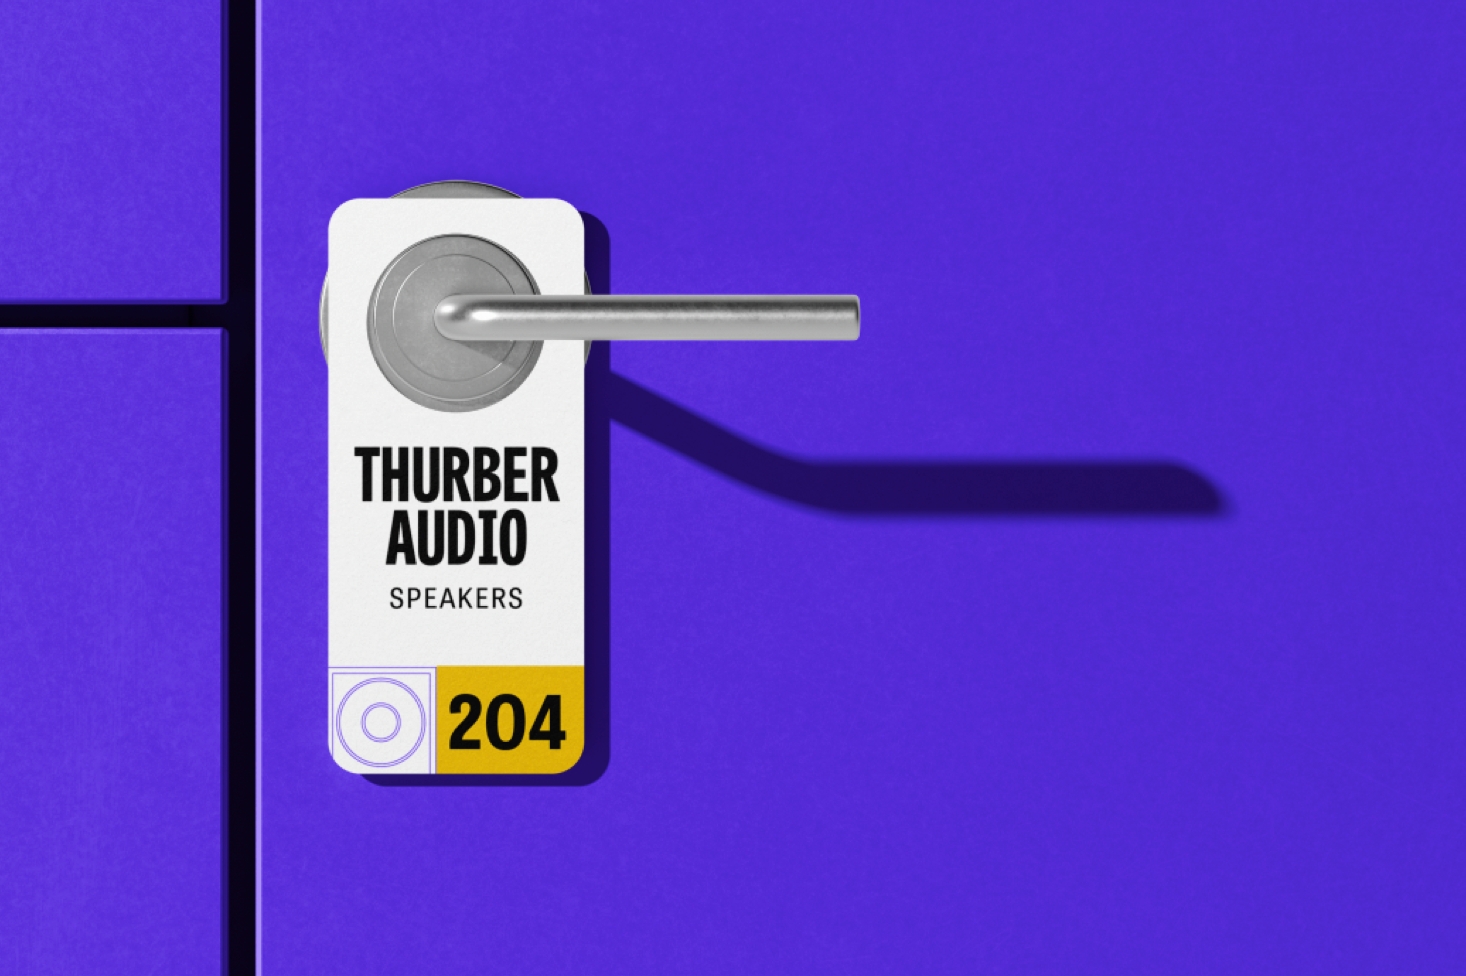 A door-hanger sign states "Thurber Audio speakers" and the number 204"